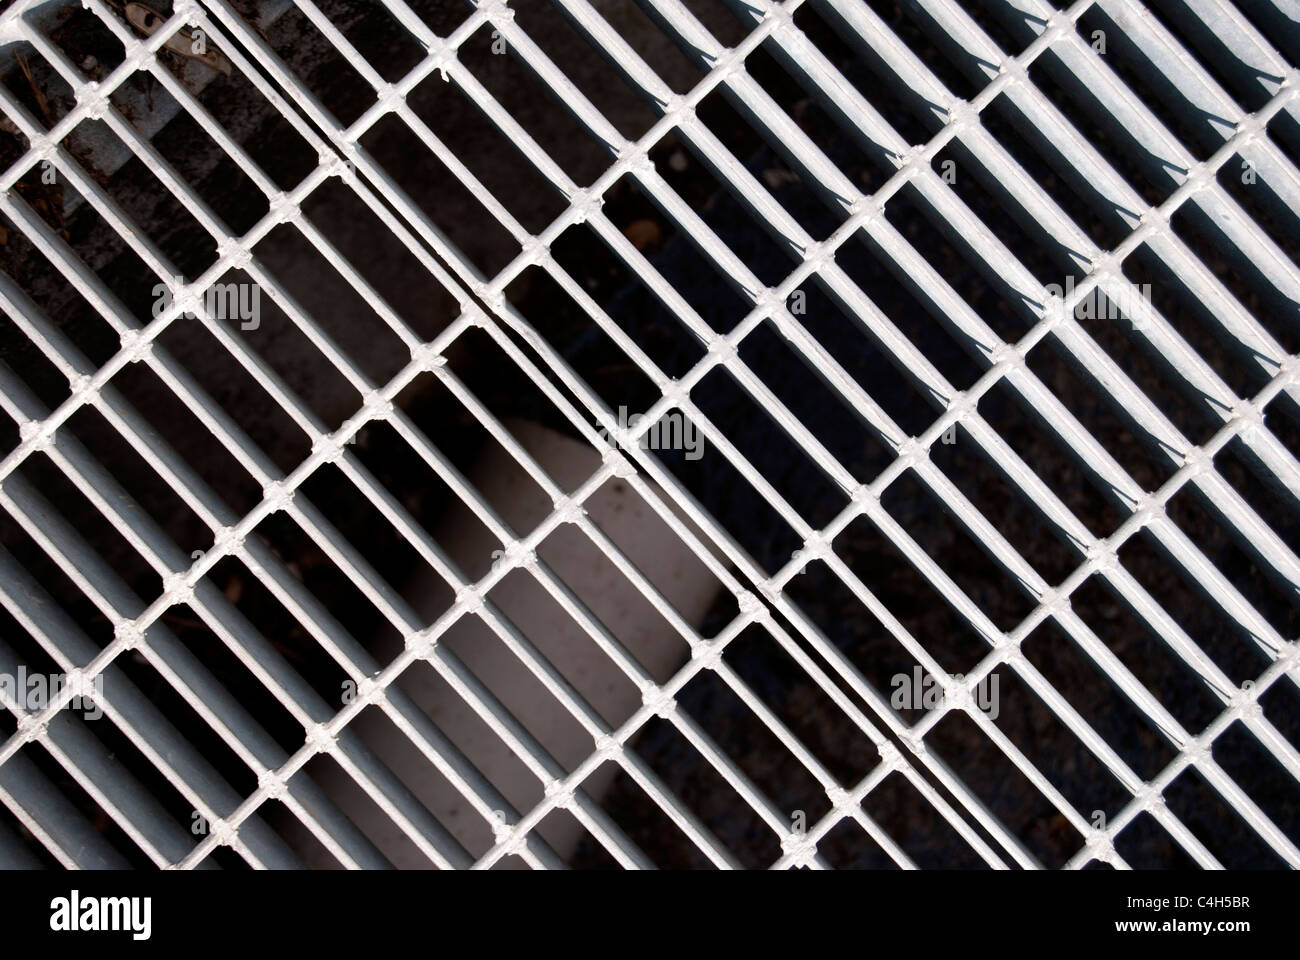 A close up of a Sewer grate Stock Photo